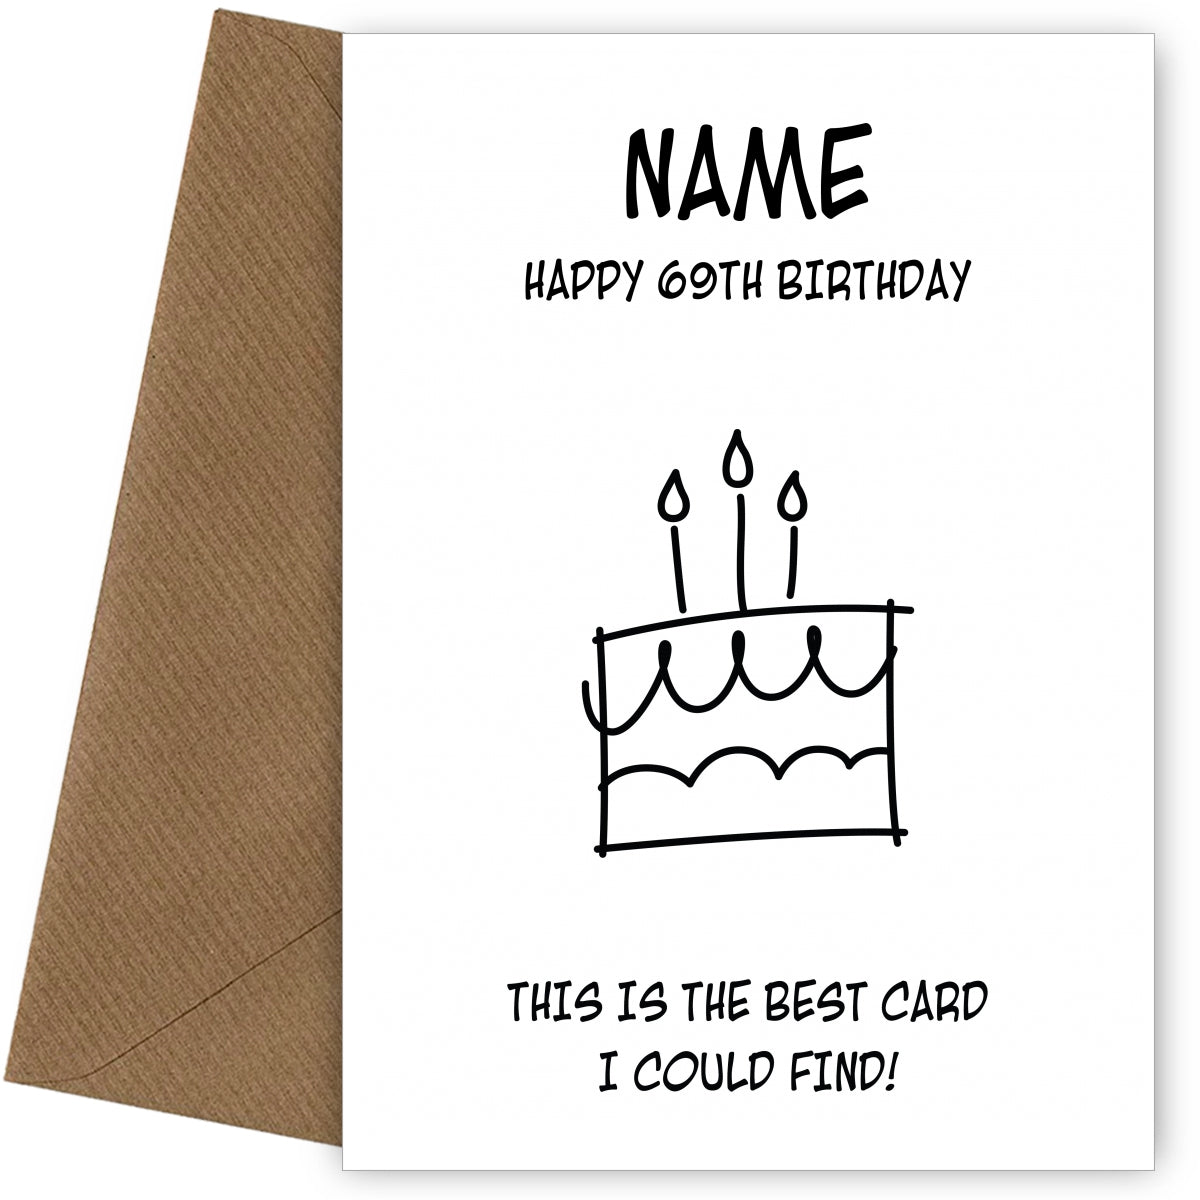 Happy 69th Birthday Card - Best Card I Could Find!